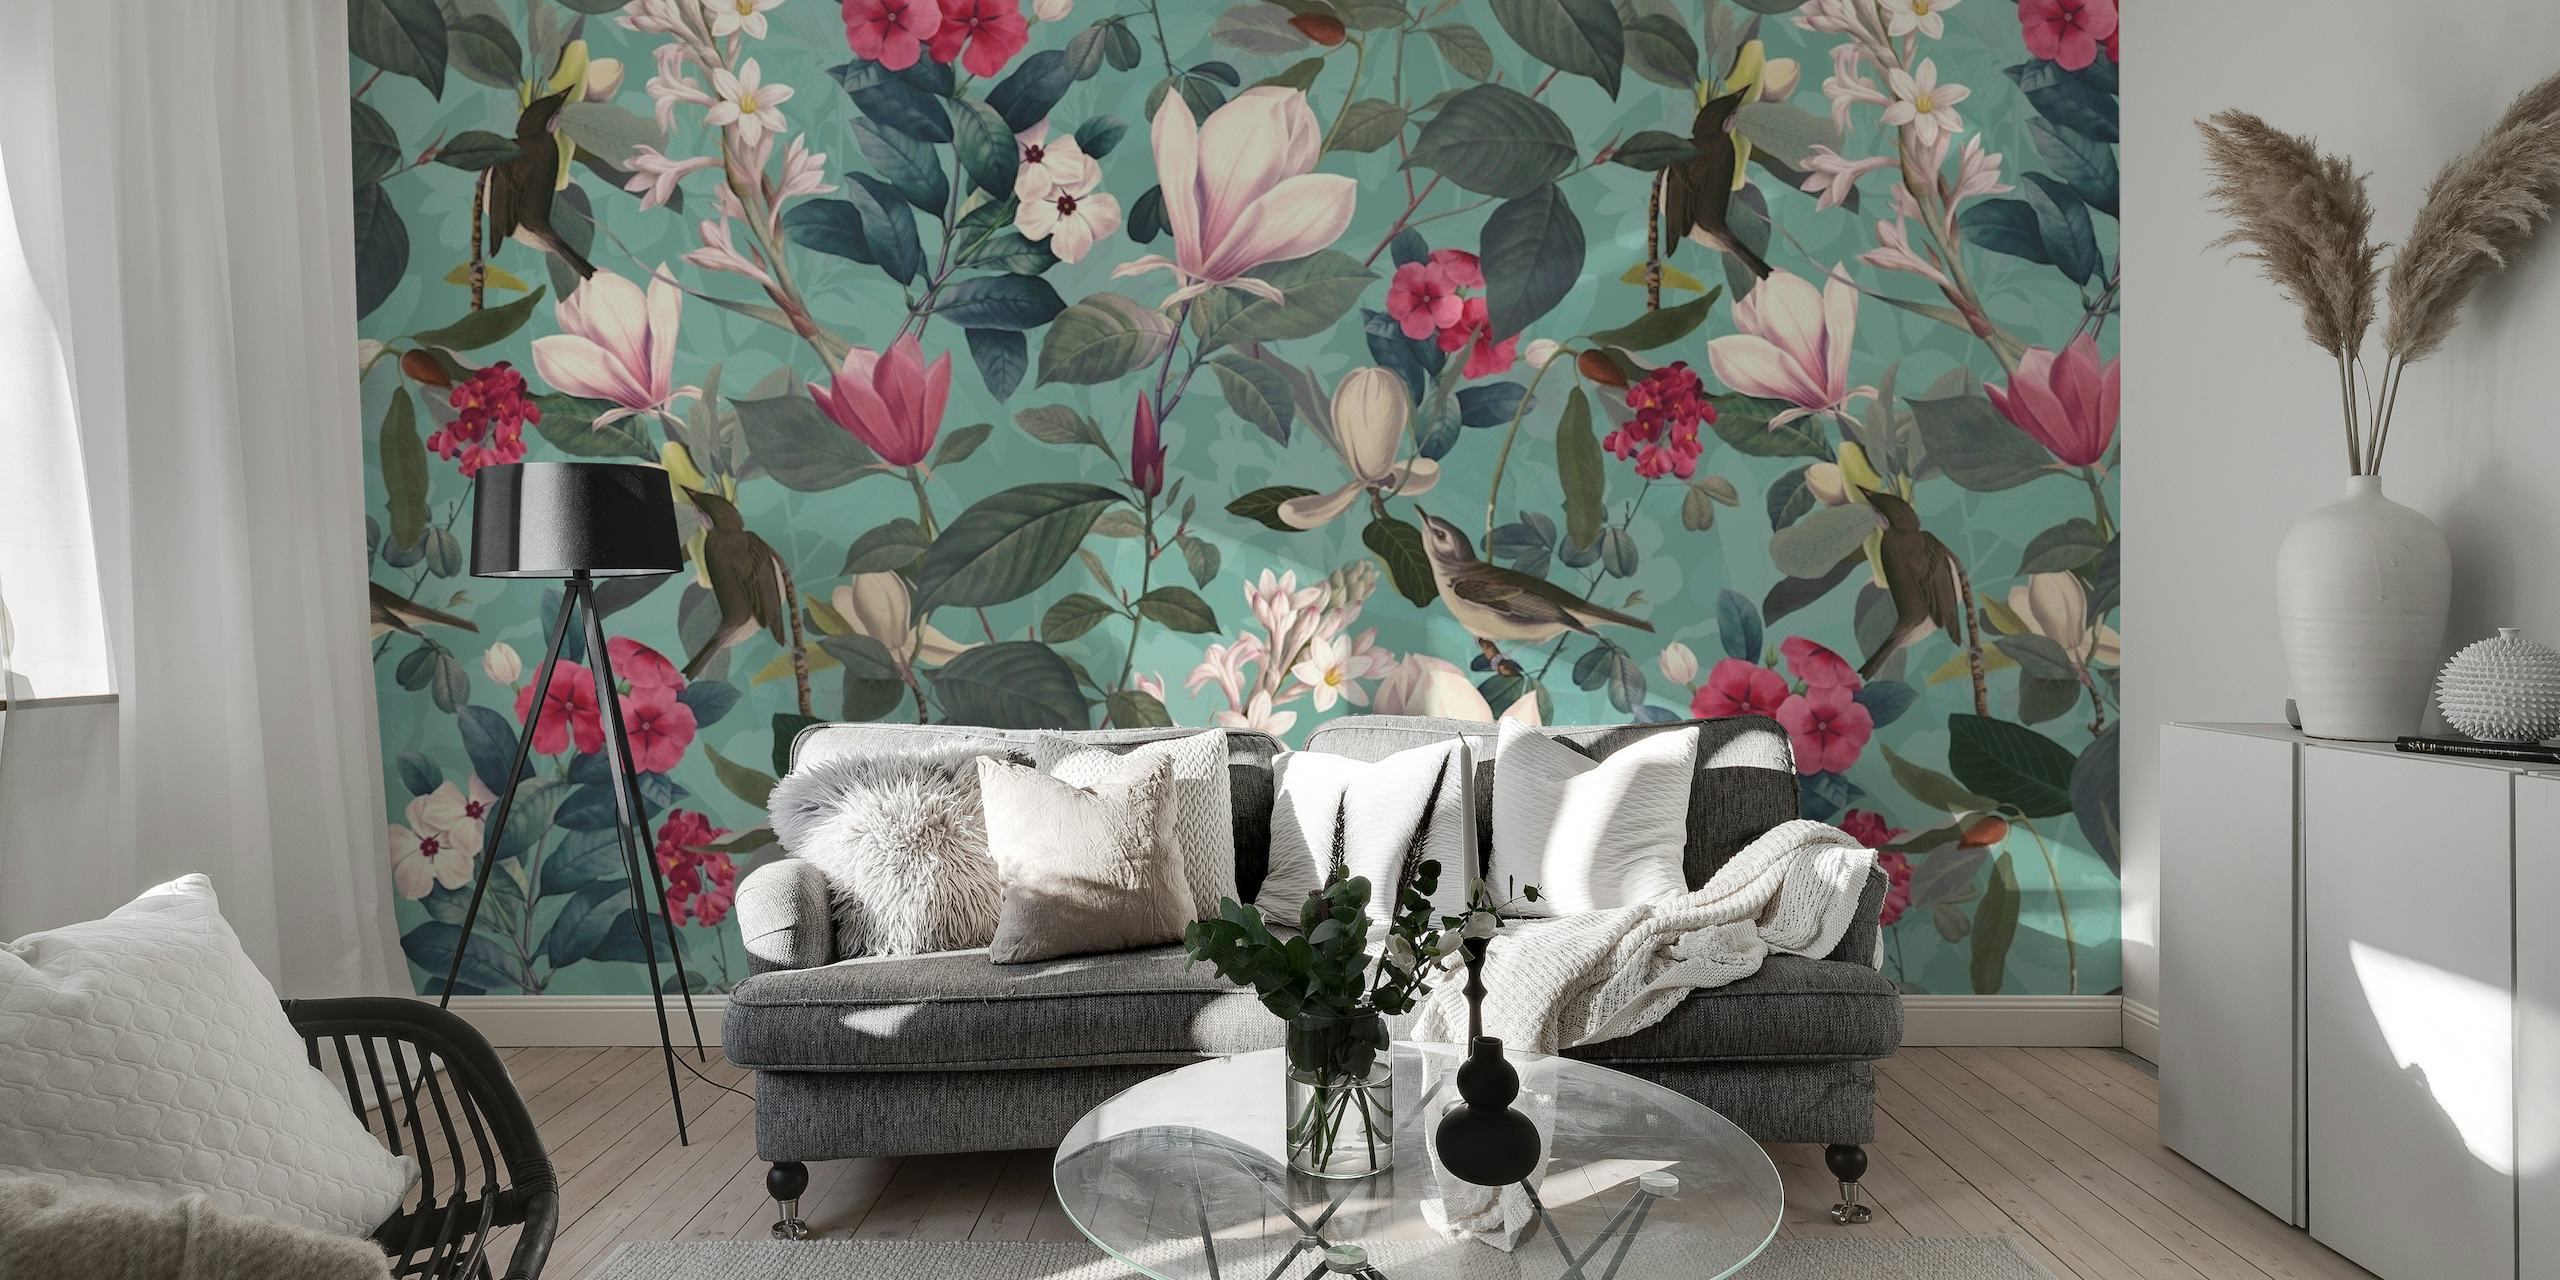 Botanical garden wall mural with birds and flowers on teal background